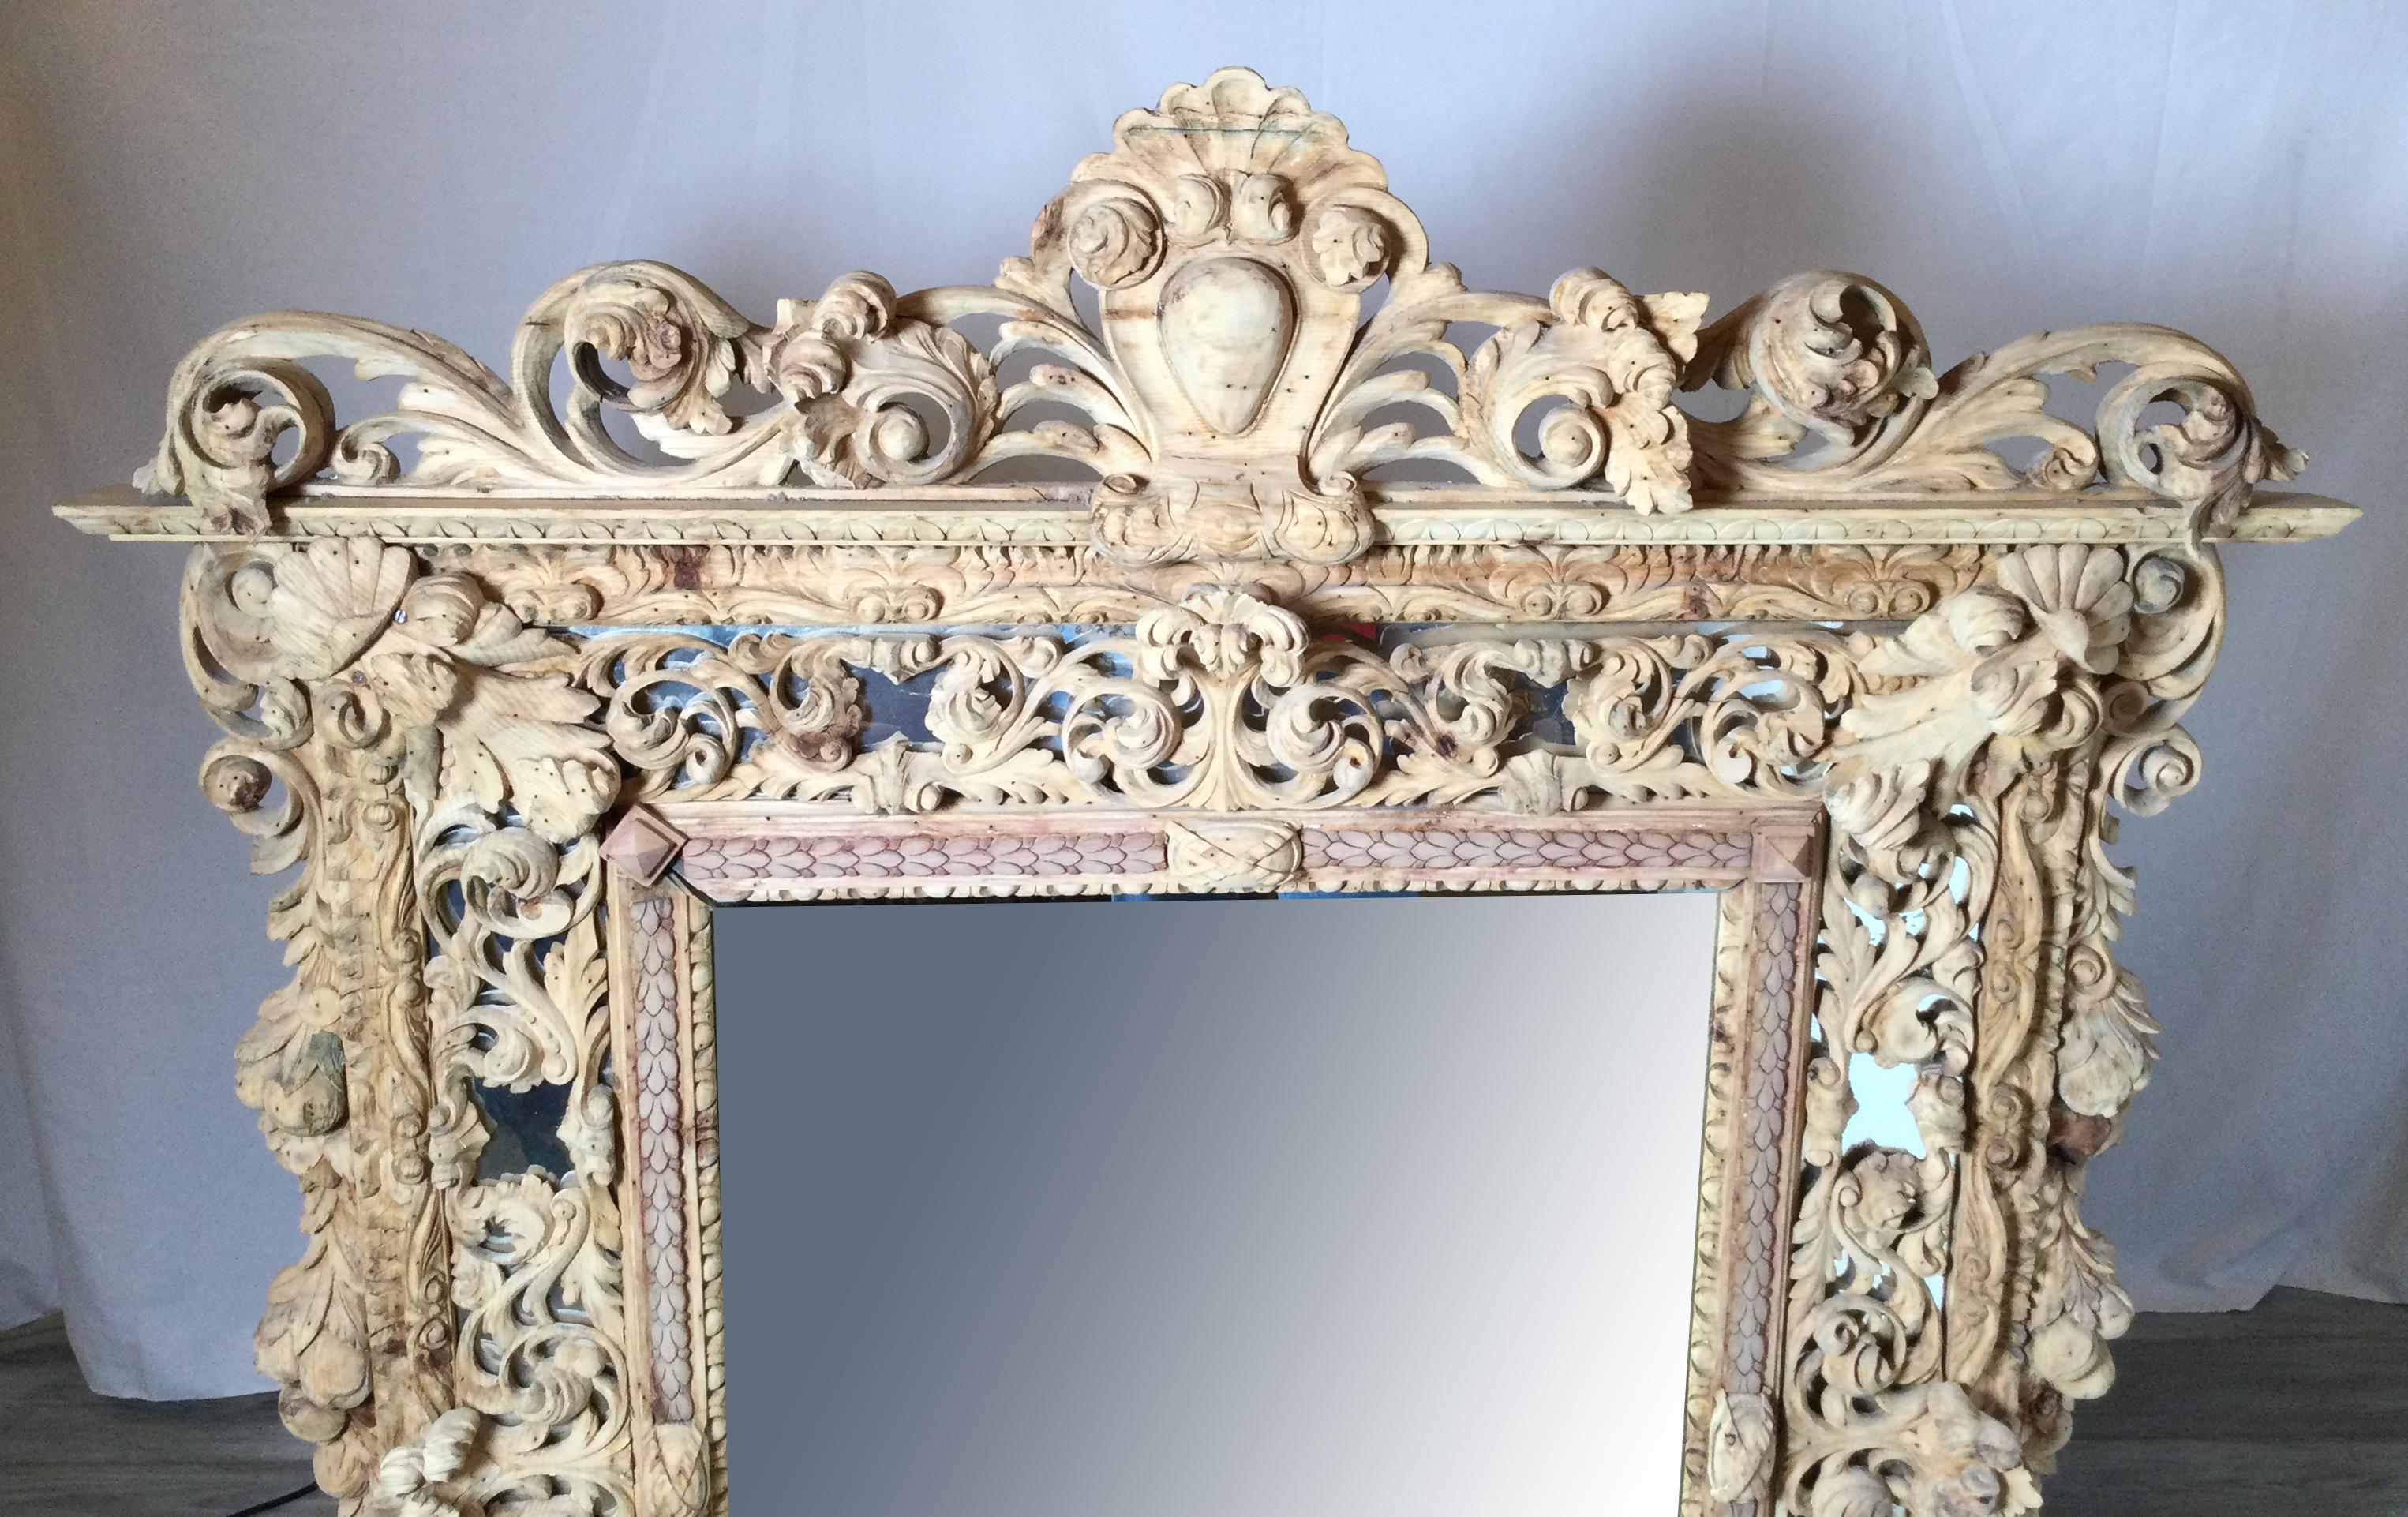 Late 18th century exceptionally hand carved wooden Venetian mirror, probably made in Italy and was gold gilded many years ago. Finish has been stripped and removed at some point.
Has a very great architectural look that is both rare and